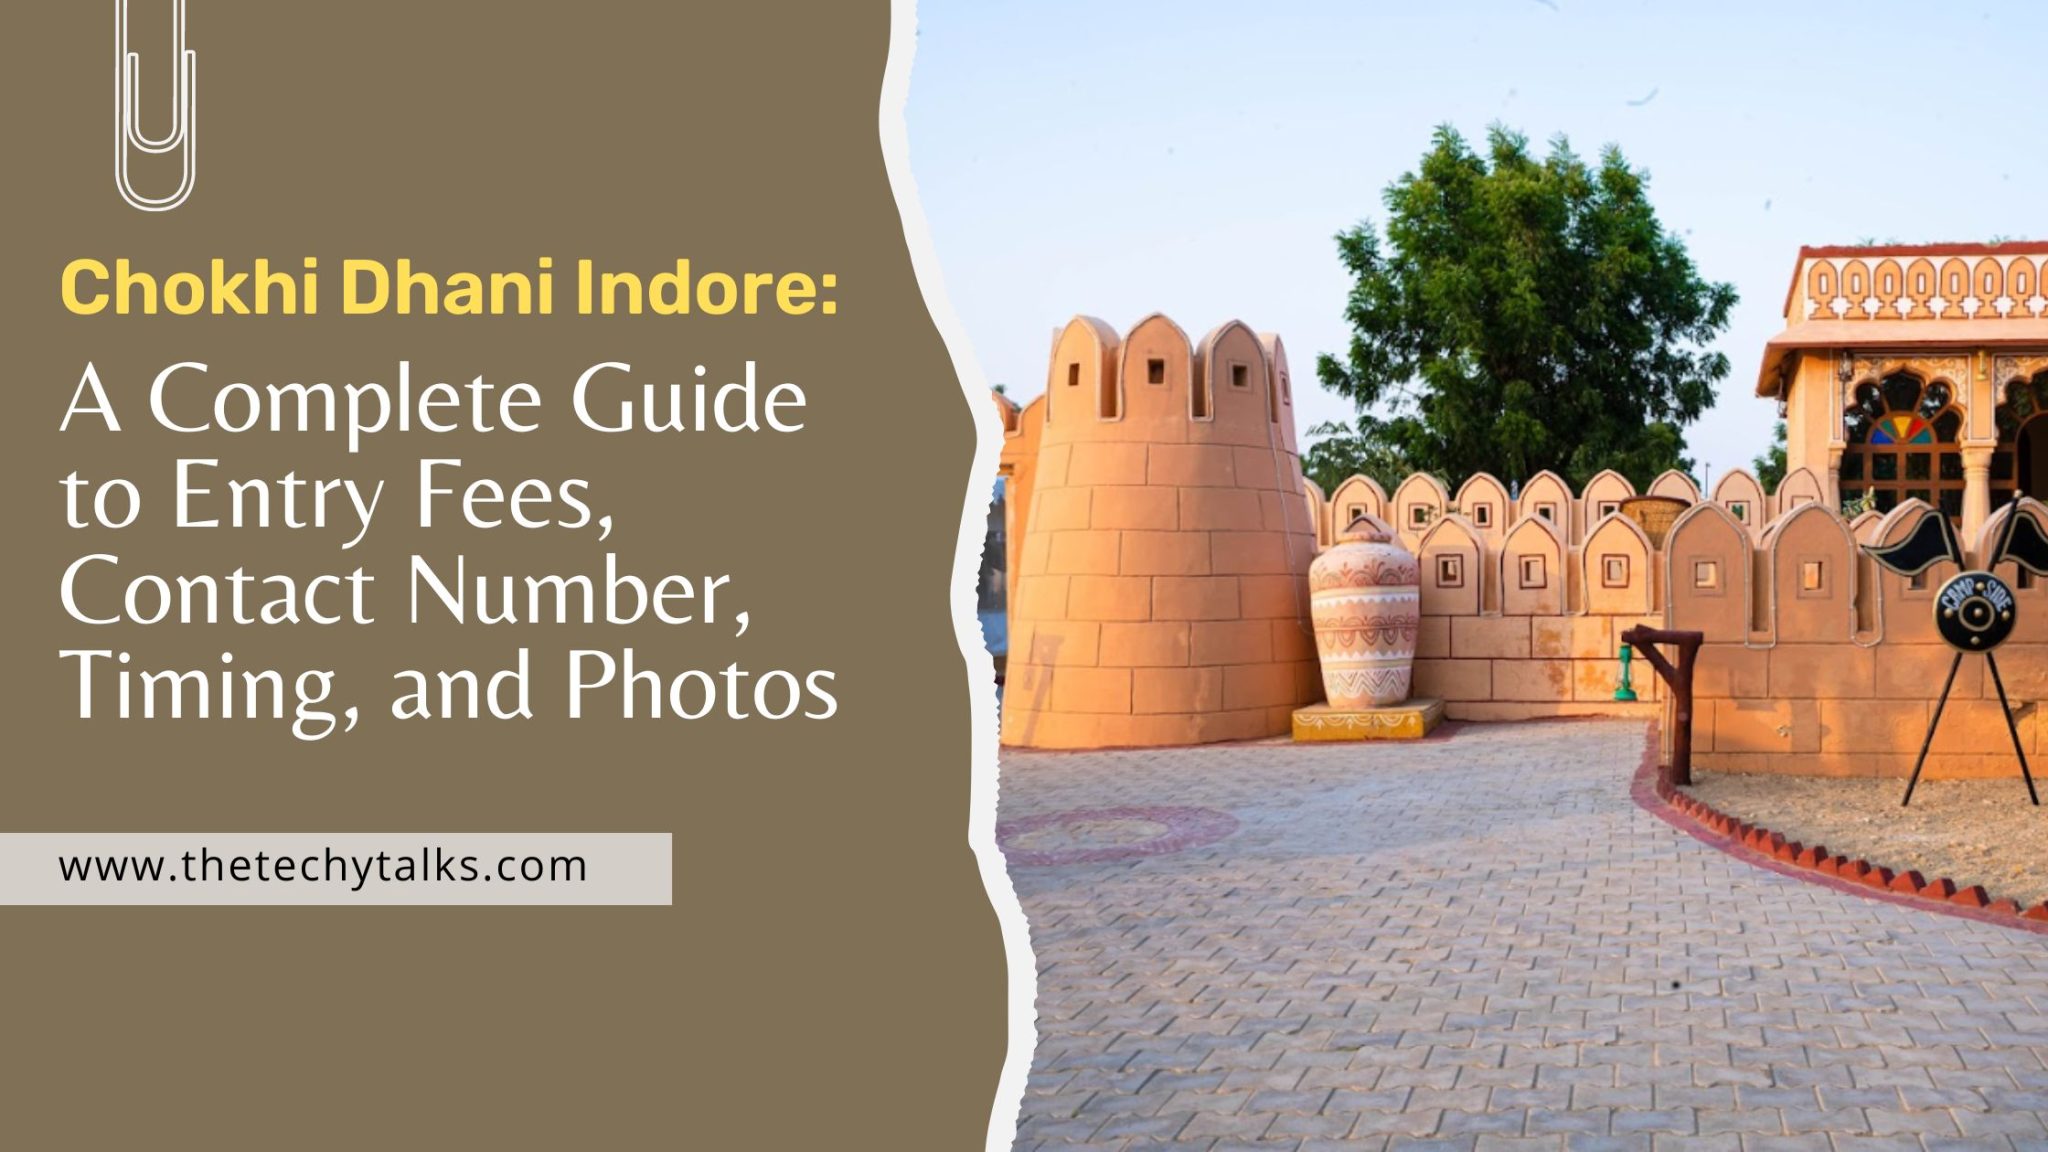 Chokhi Dhani Indore: A Complete Guide to Entry Fees, Contact Number, Timing, and Photos